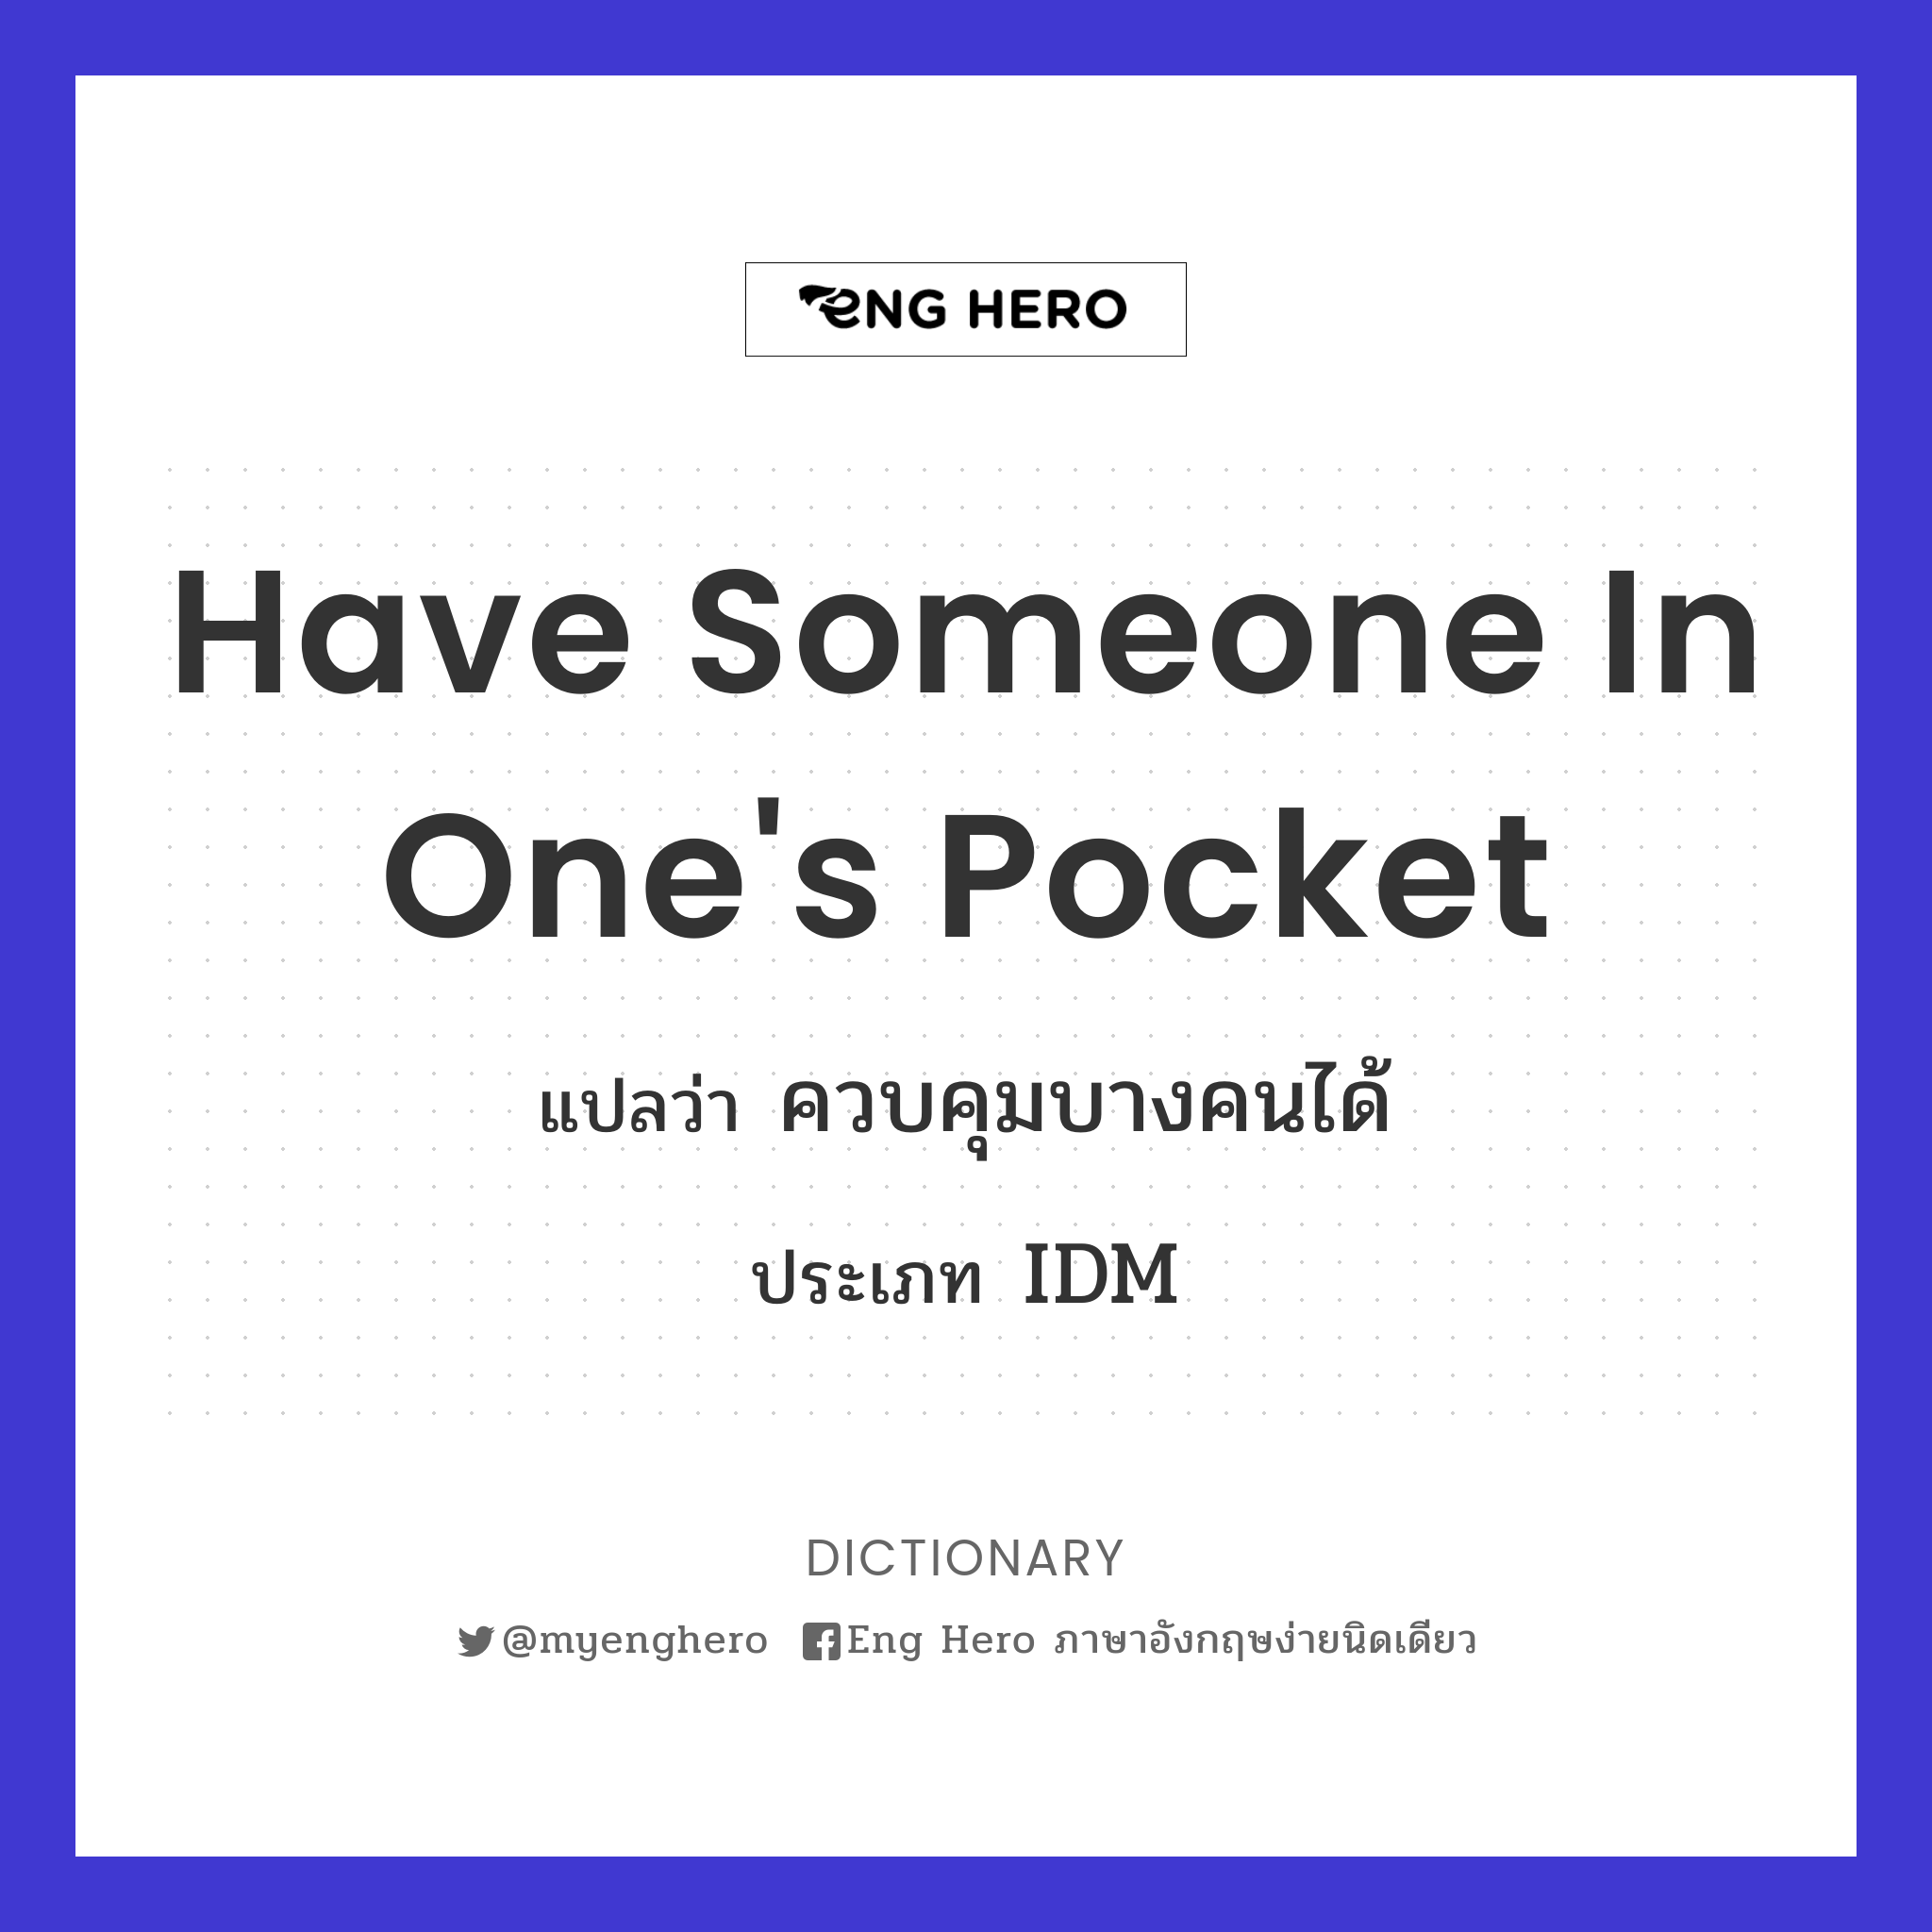 have someone in one's pocket